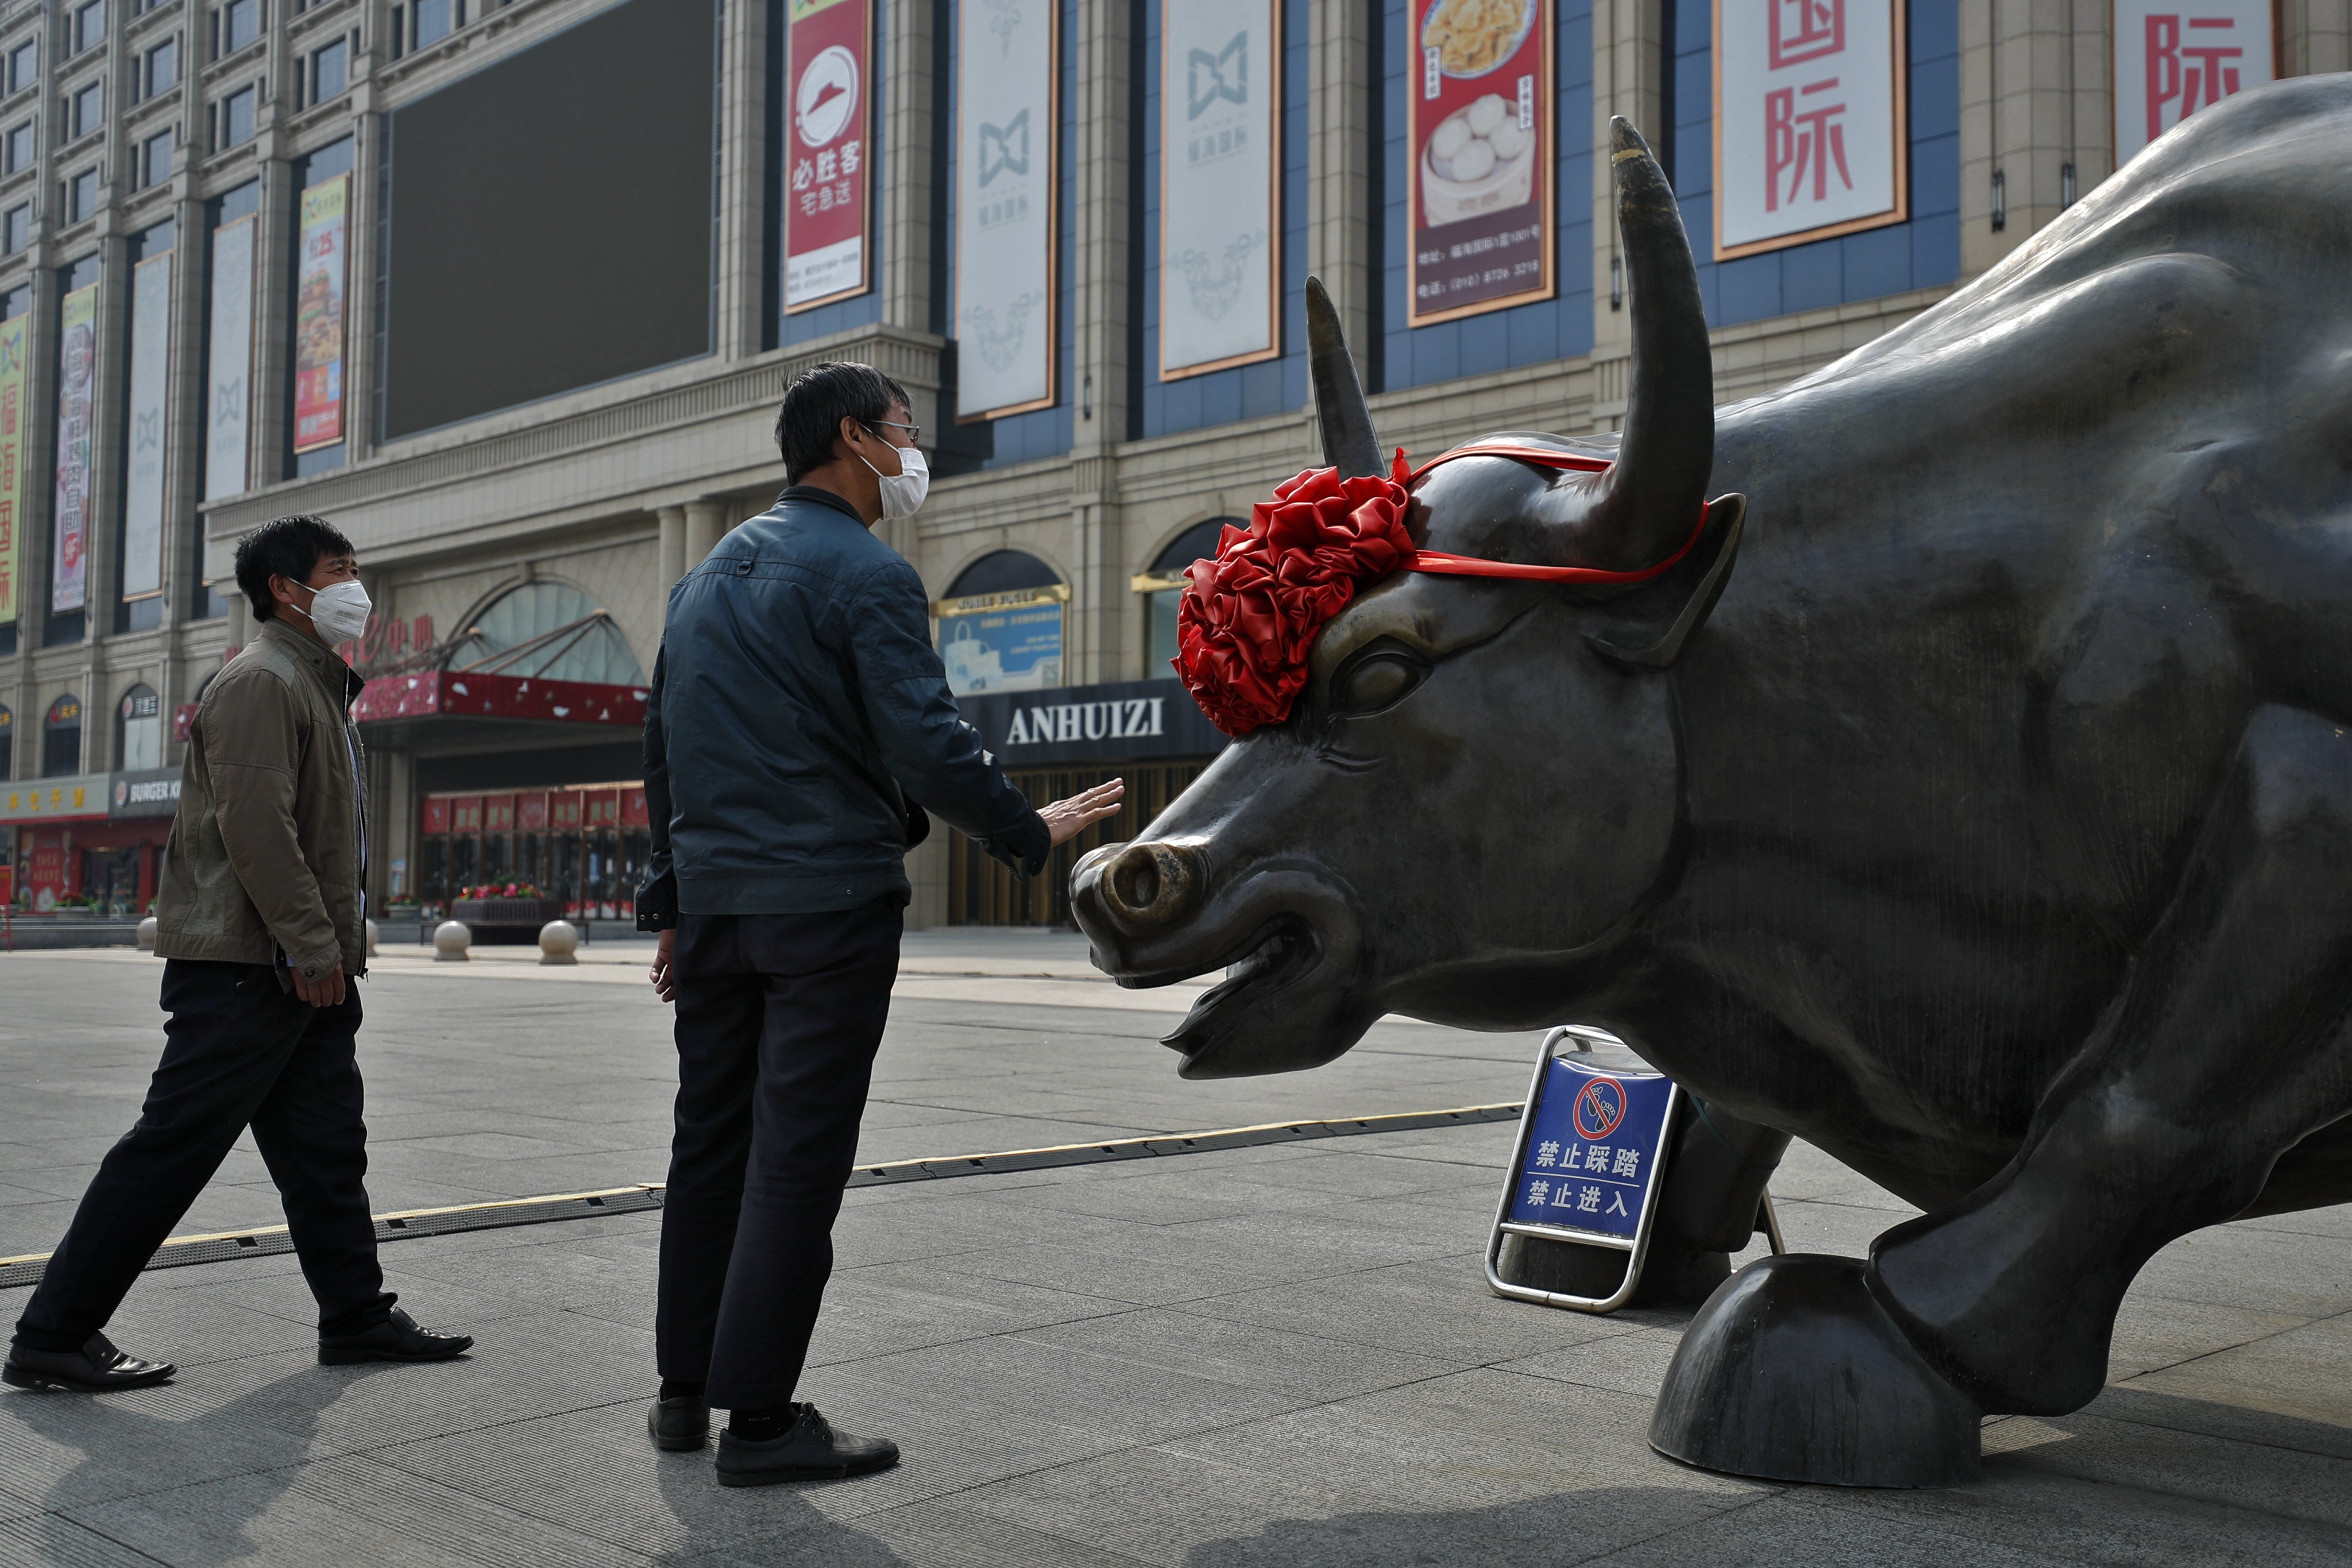 A man wearing a protective face mask touches the investment icon bull statue on display outside a mall in Beijing in March 2020. Photo: AP